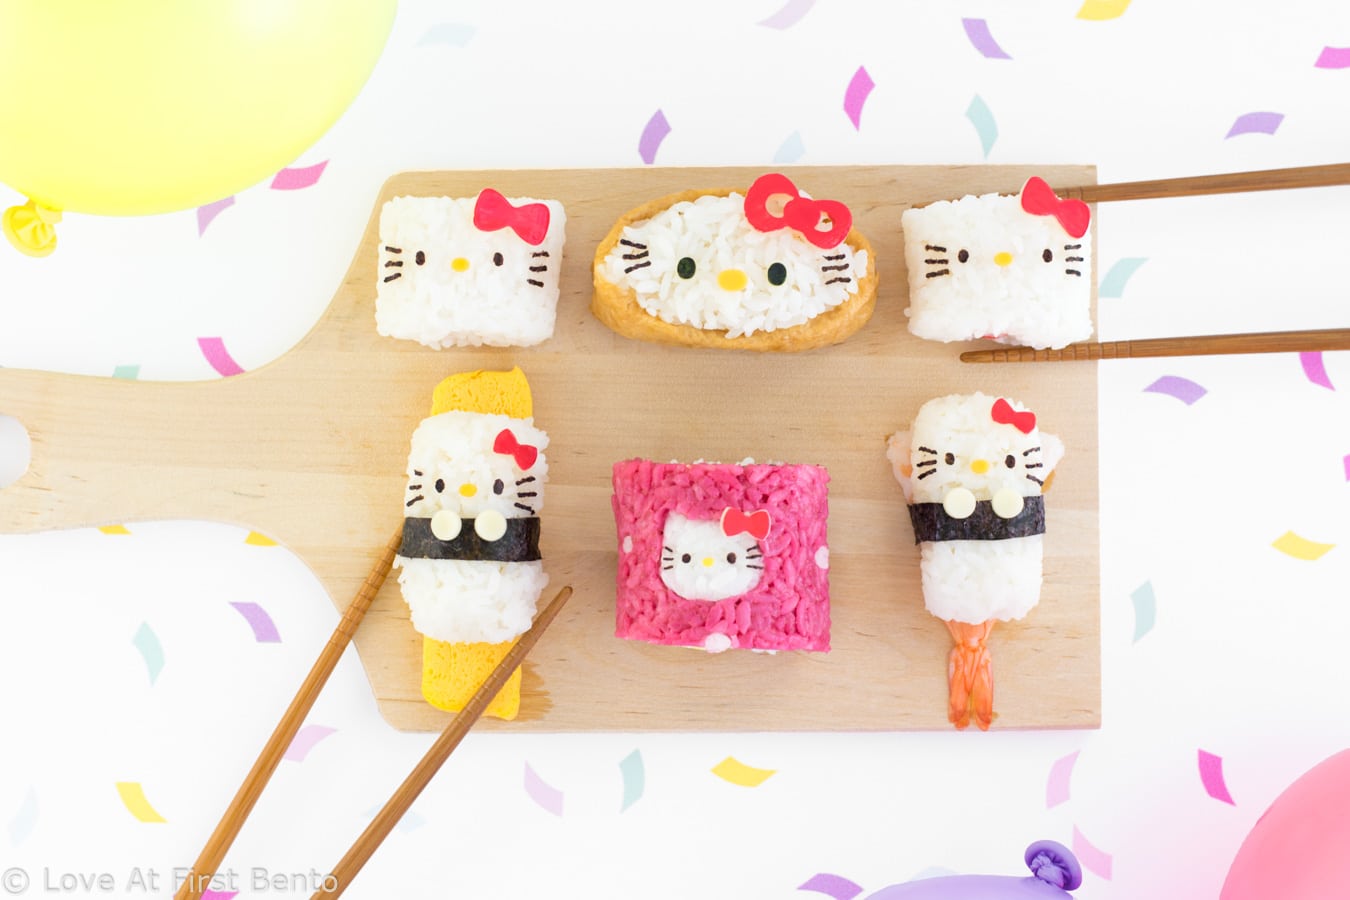 Hello Kitty Sushi Party - The perfect way to celebrate International Sushi Day! These 5 adorable Hello Kitty sushi designs are a Hello Kitty fan's dream come true, and a truly almost too cute to eat! Even complete beginners can learn how to make these Hello Kitty sushi from start to finish - find out how by visiting loveatfirstbento.com